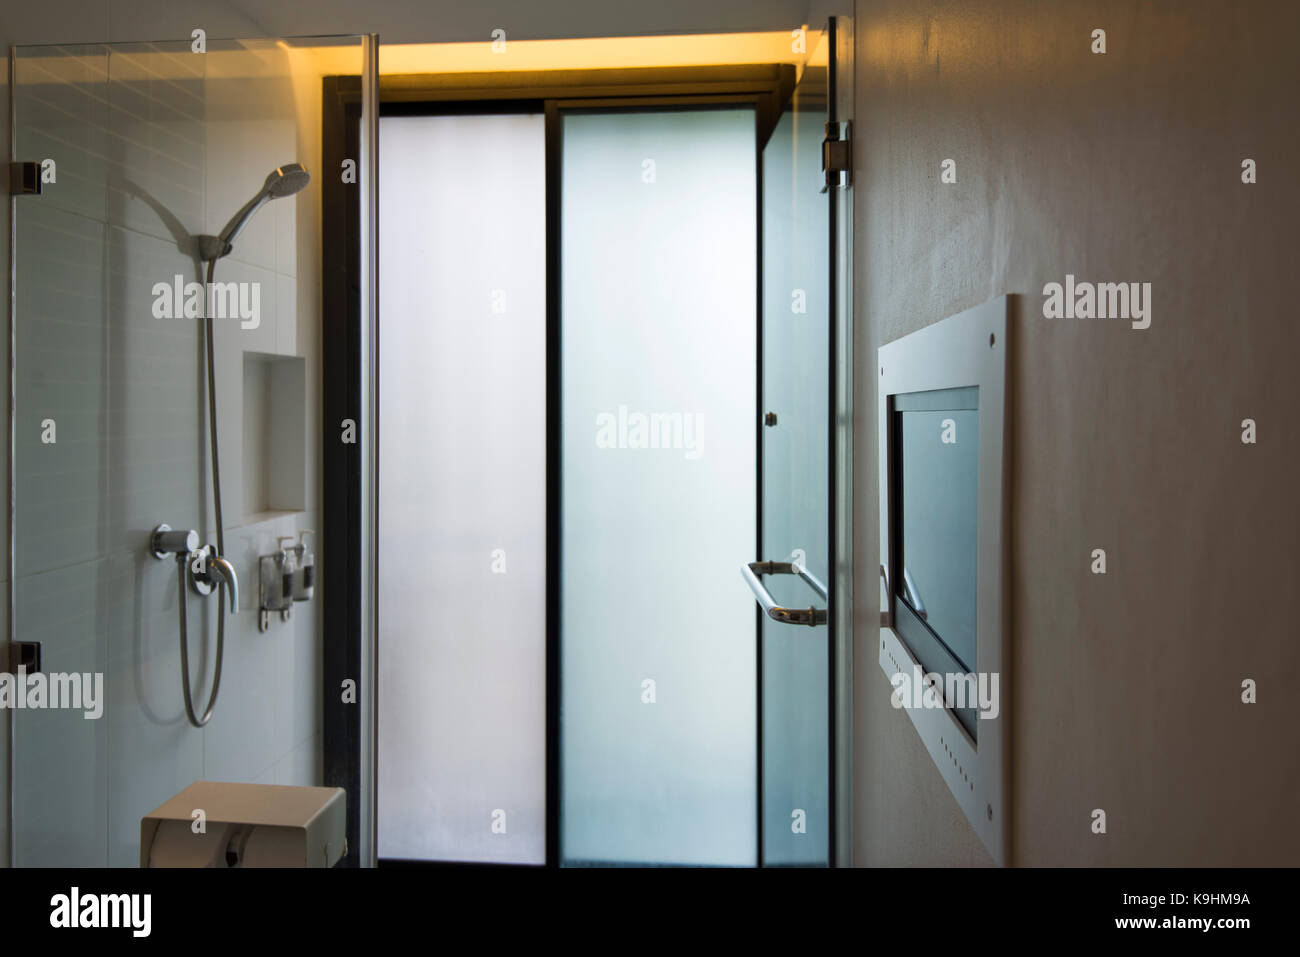 Modern bathroom with Television screen for entertainment while using the toilet and bathroom. Stock Photo